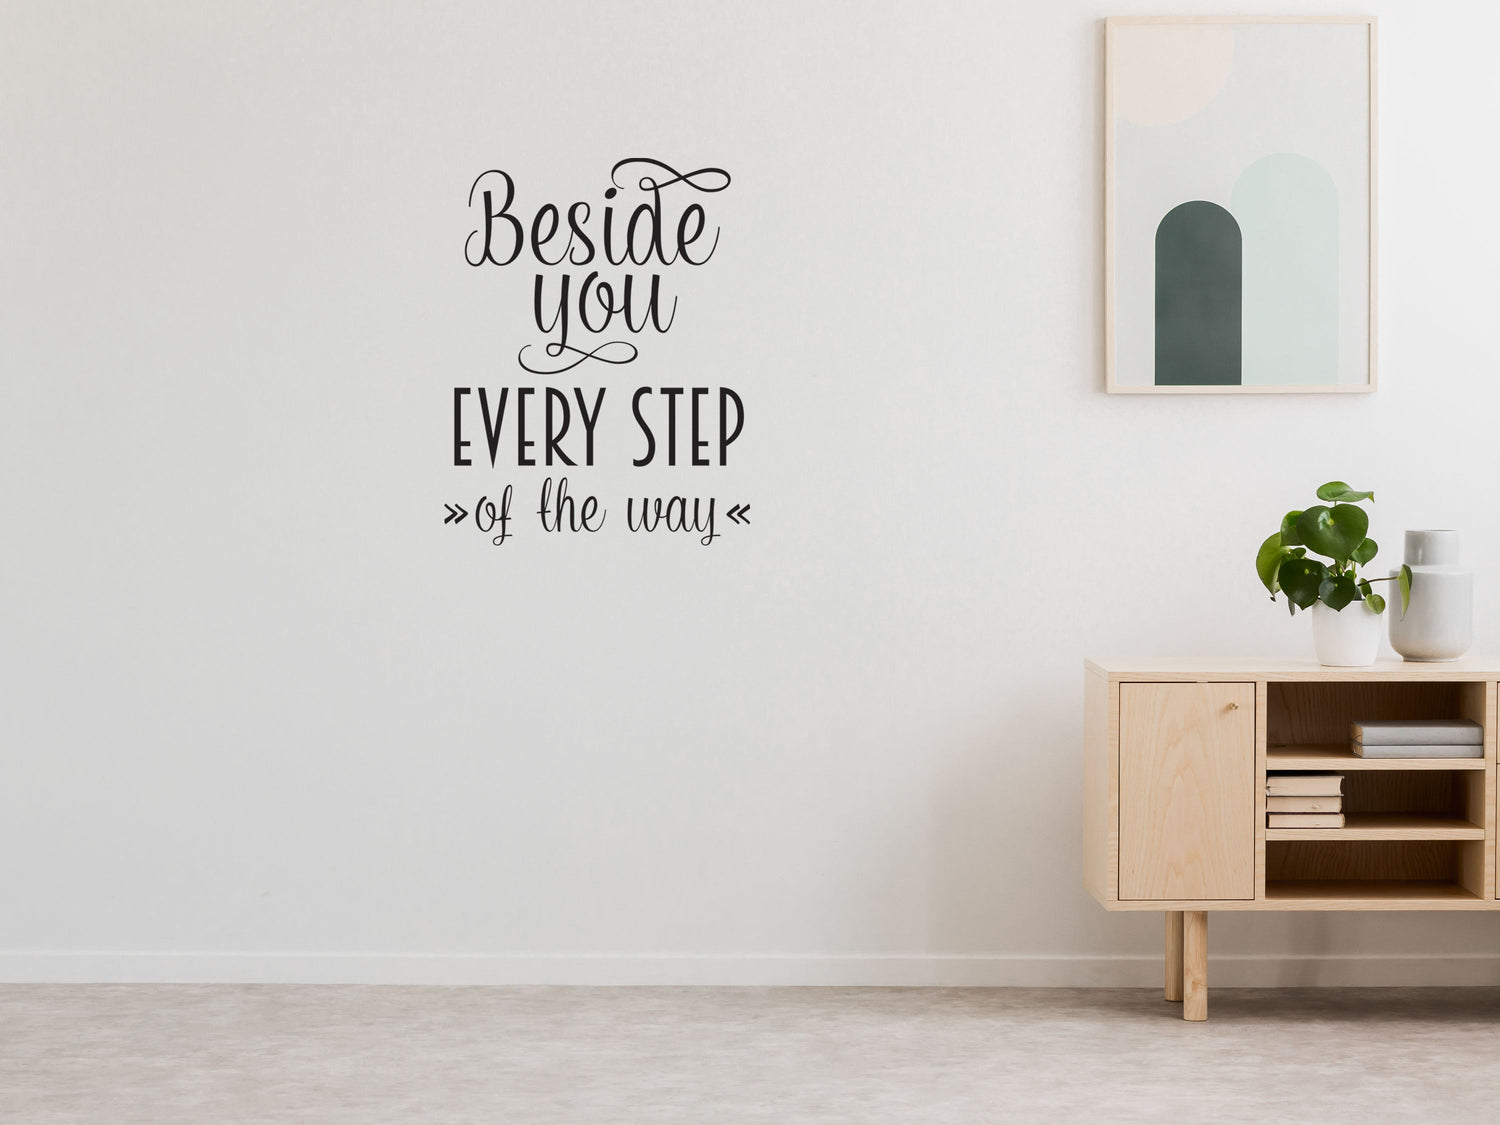 Beside You Every Step Of The Way Fun Wall Sign Sticker Vinyl Wall Decal Inspirational Wall Signs 